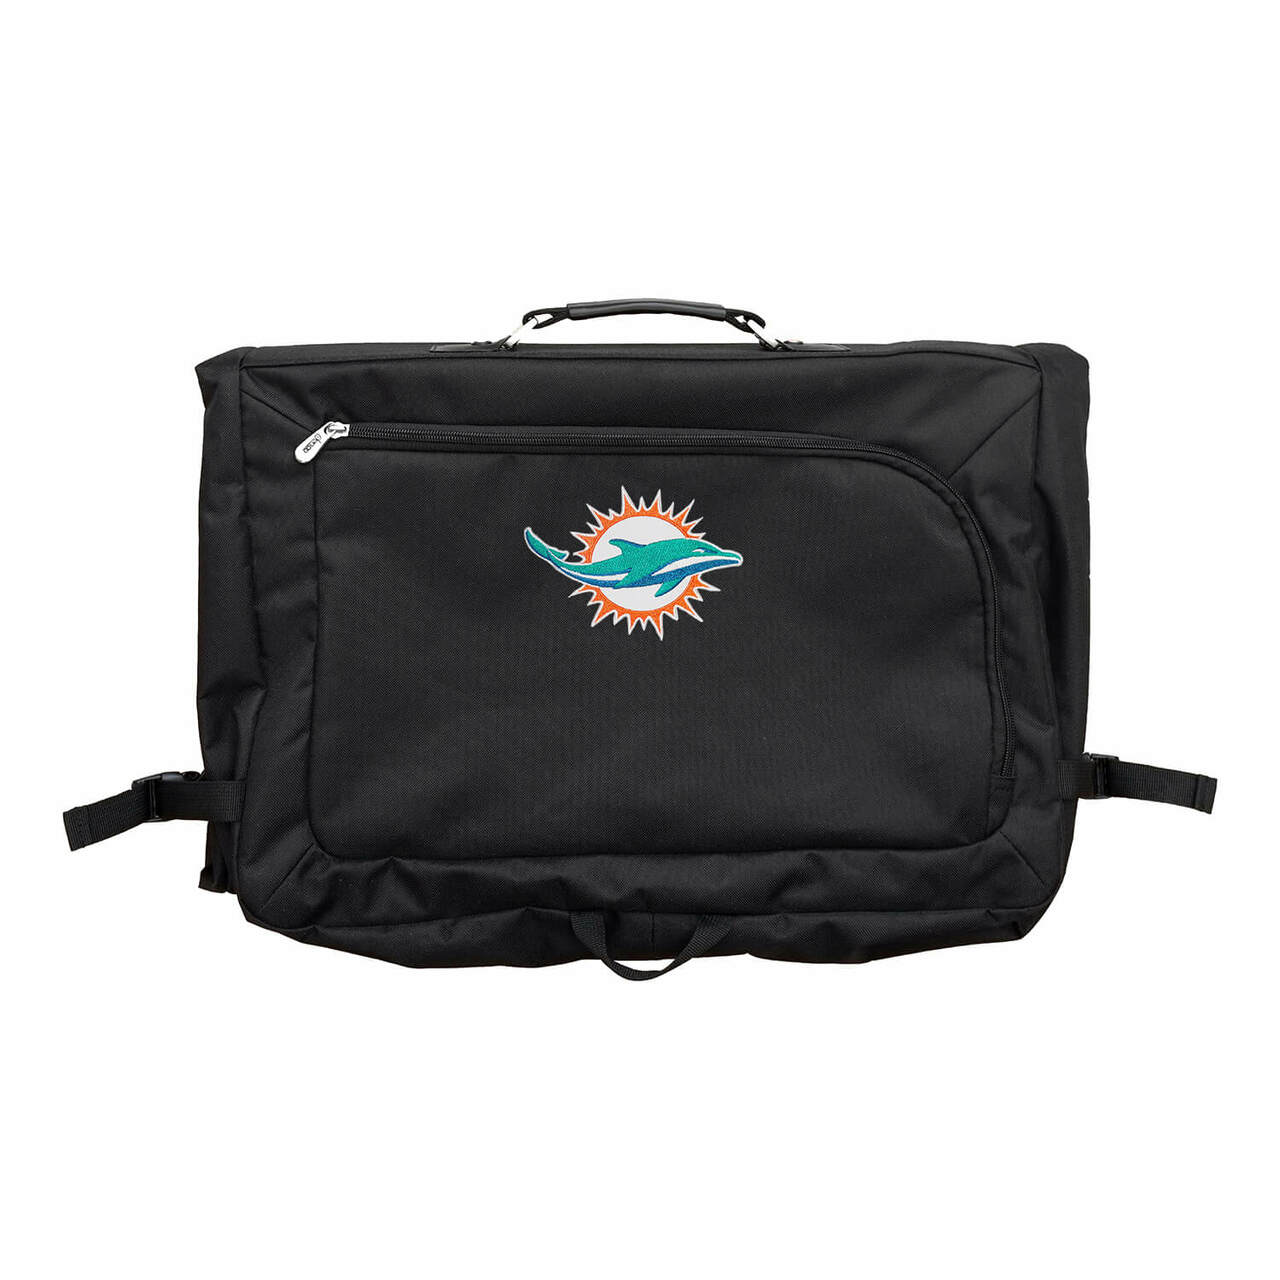 Miami Dolphins 18" Carry On Garment Bag